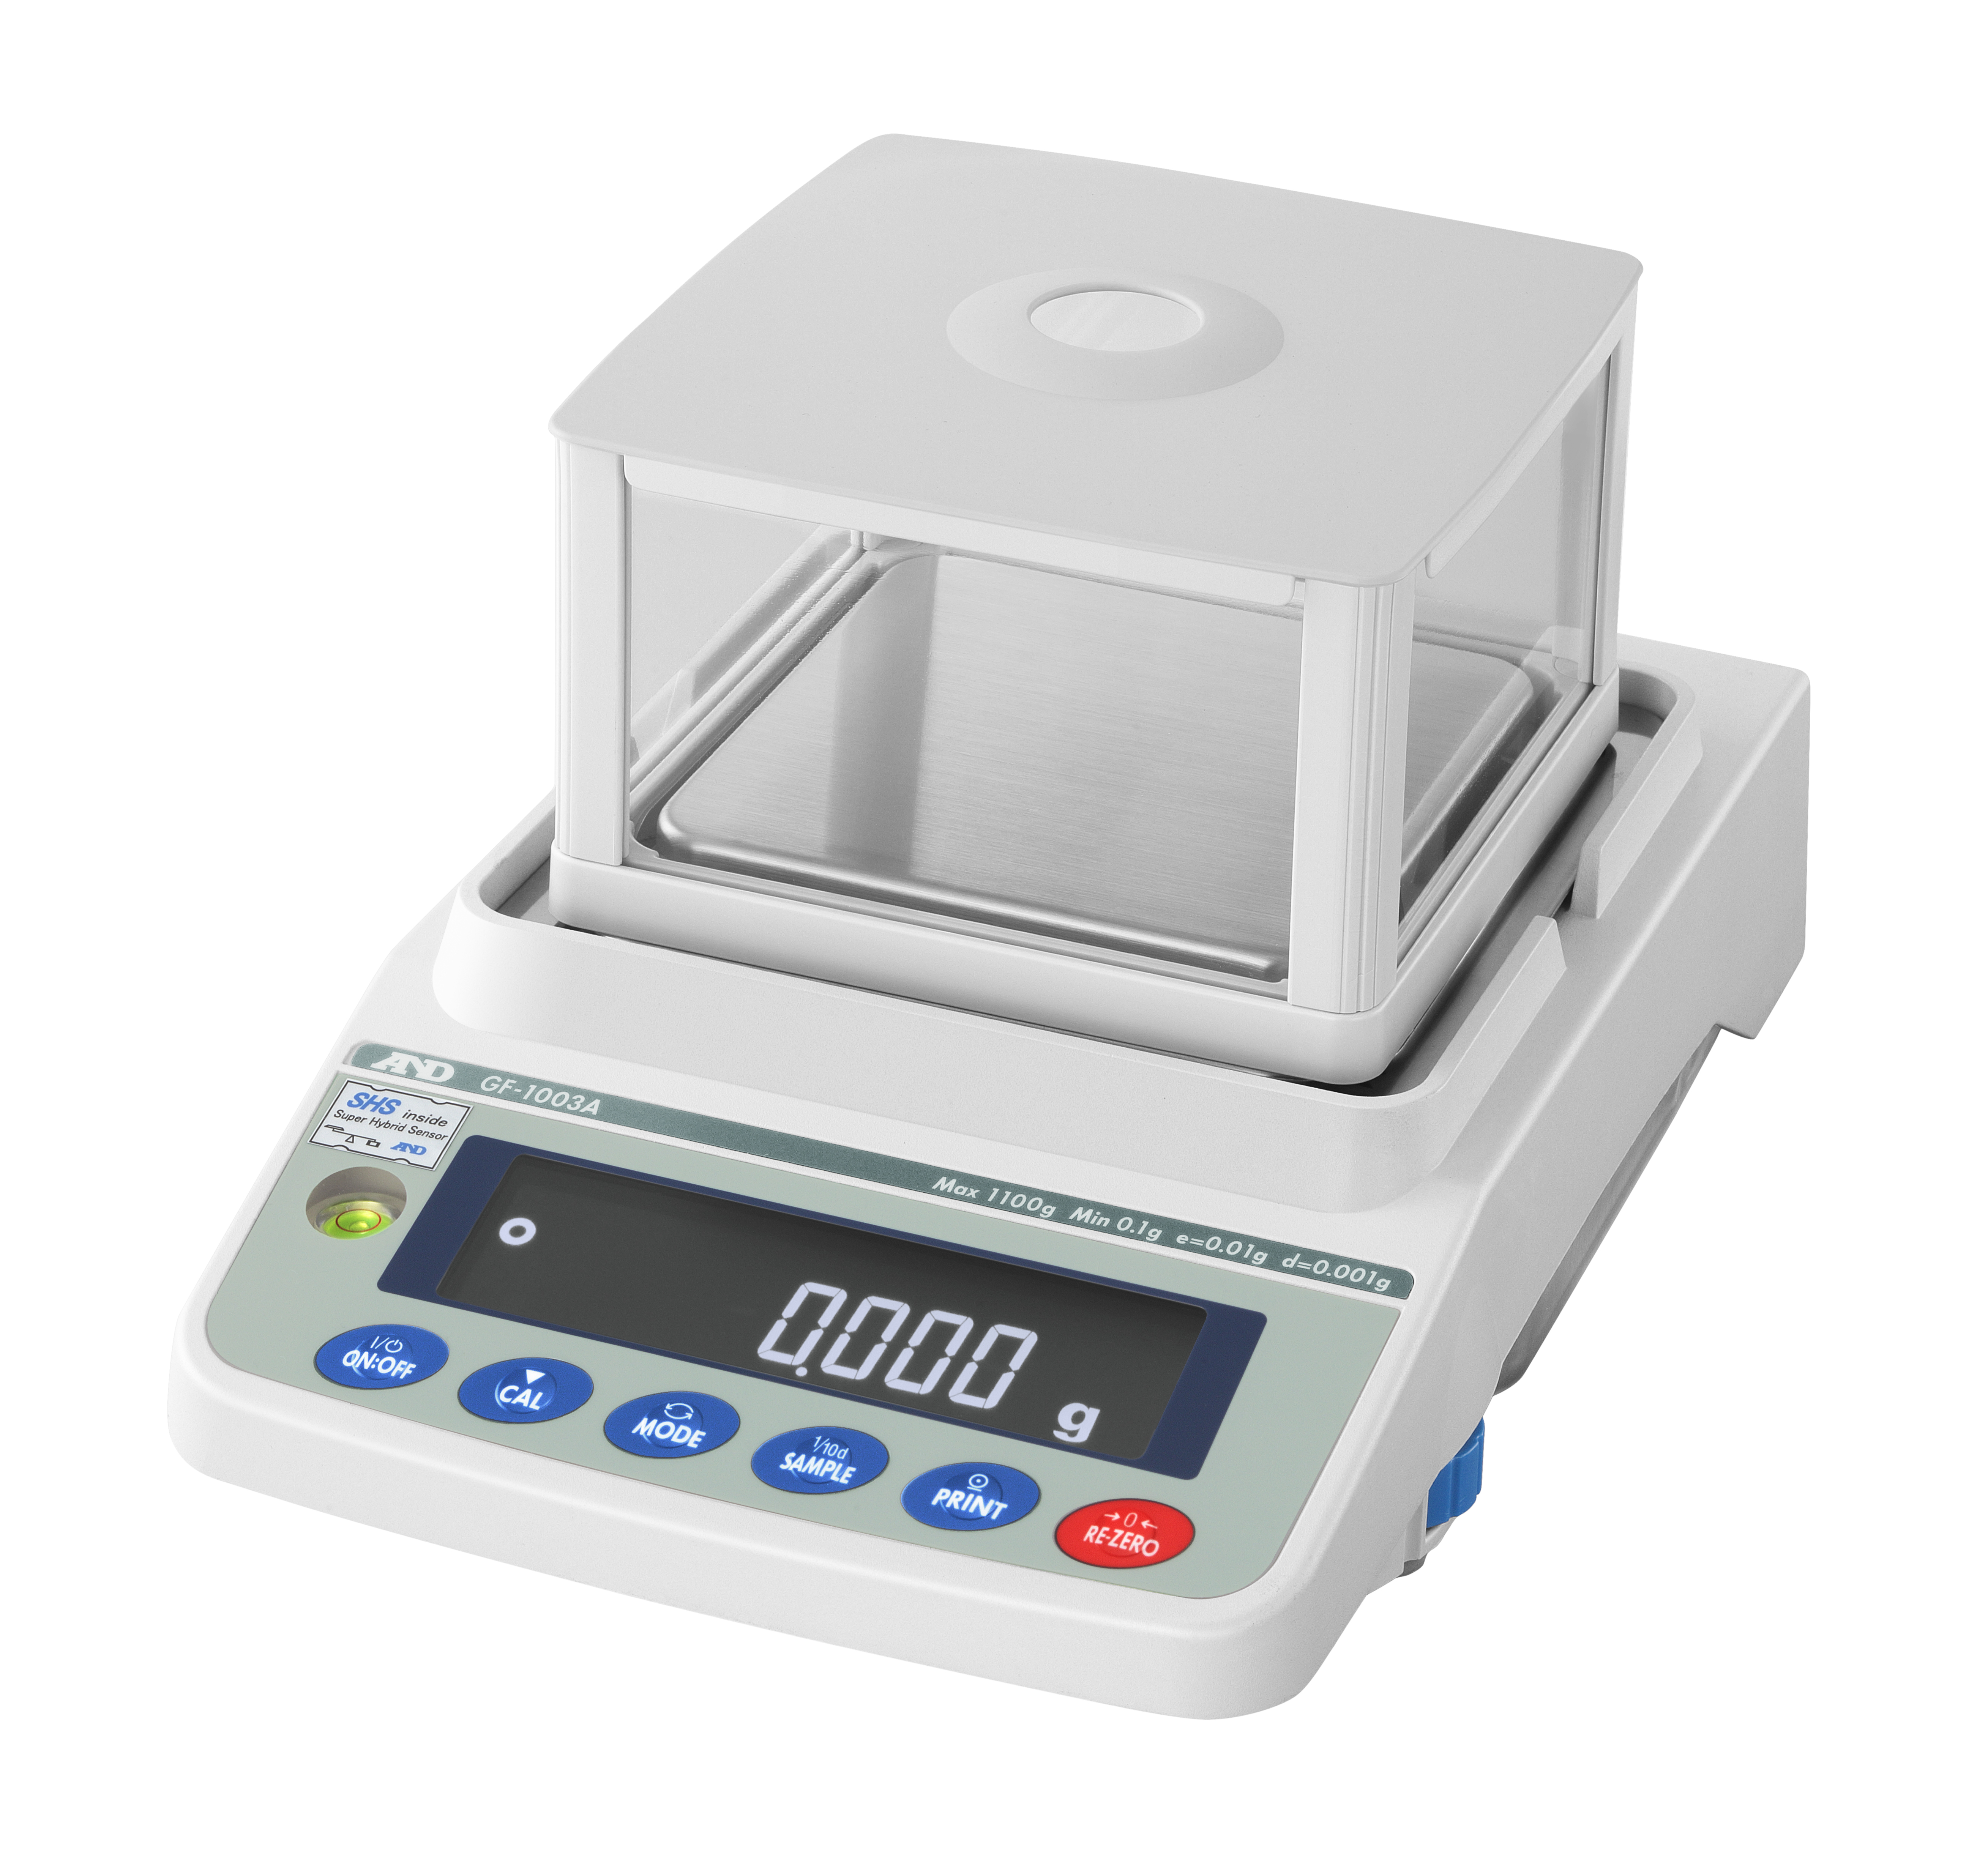 Apollo Analytical Balance with Internal Calibration A&D Weighing GX-124A 122 g 0.0001 g 5 Year Warranty 